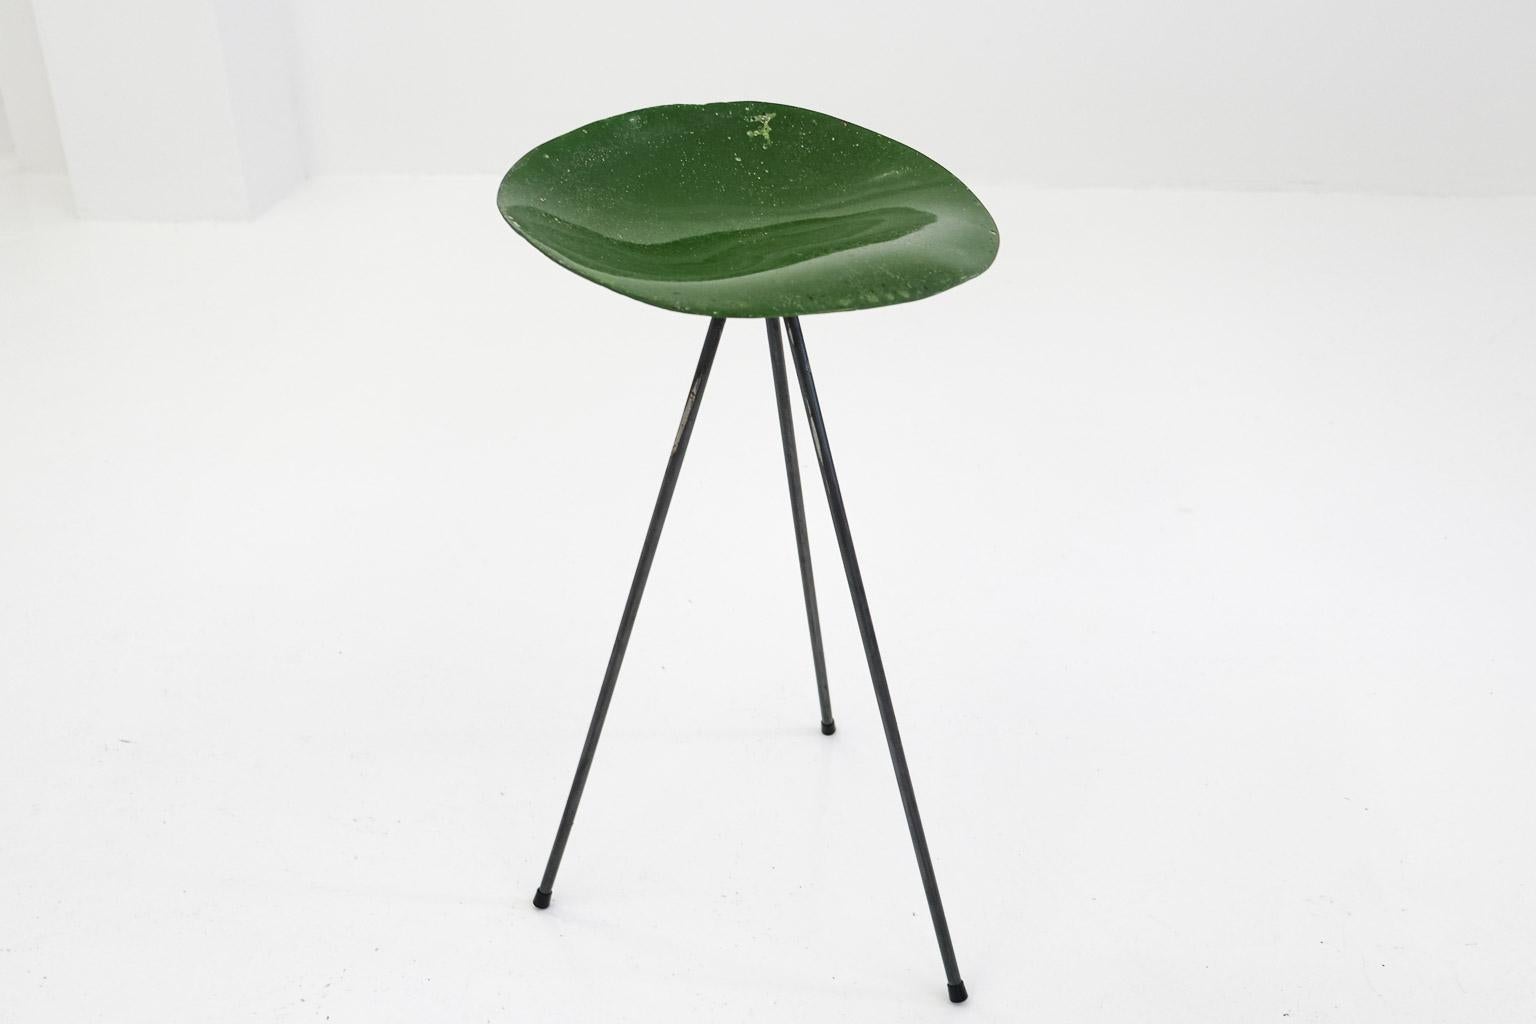 French Tripod stool by Jean Raymond Picard/Jean-René Picard for S.E.T.A., France, 1955 For Sale